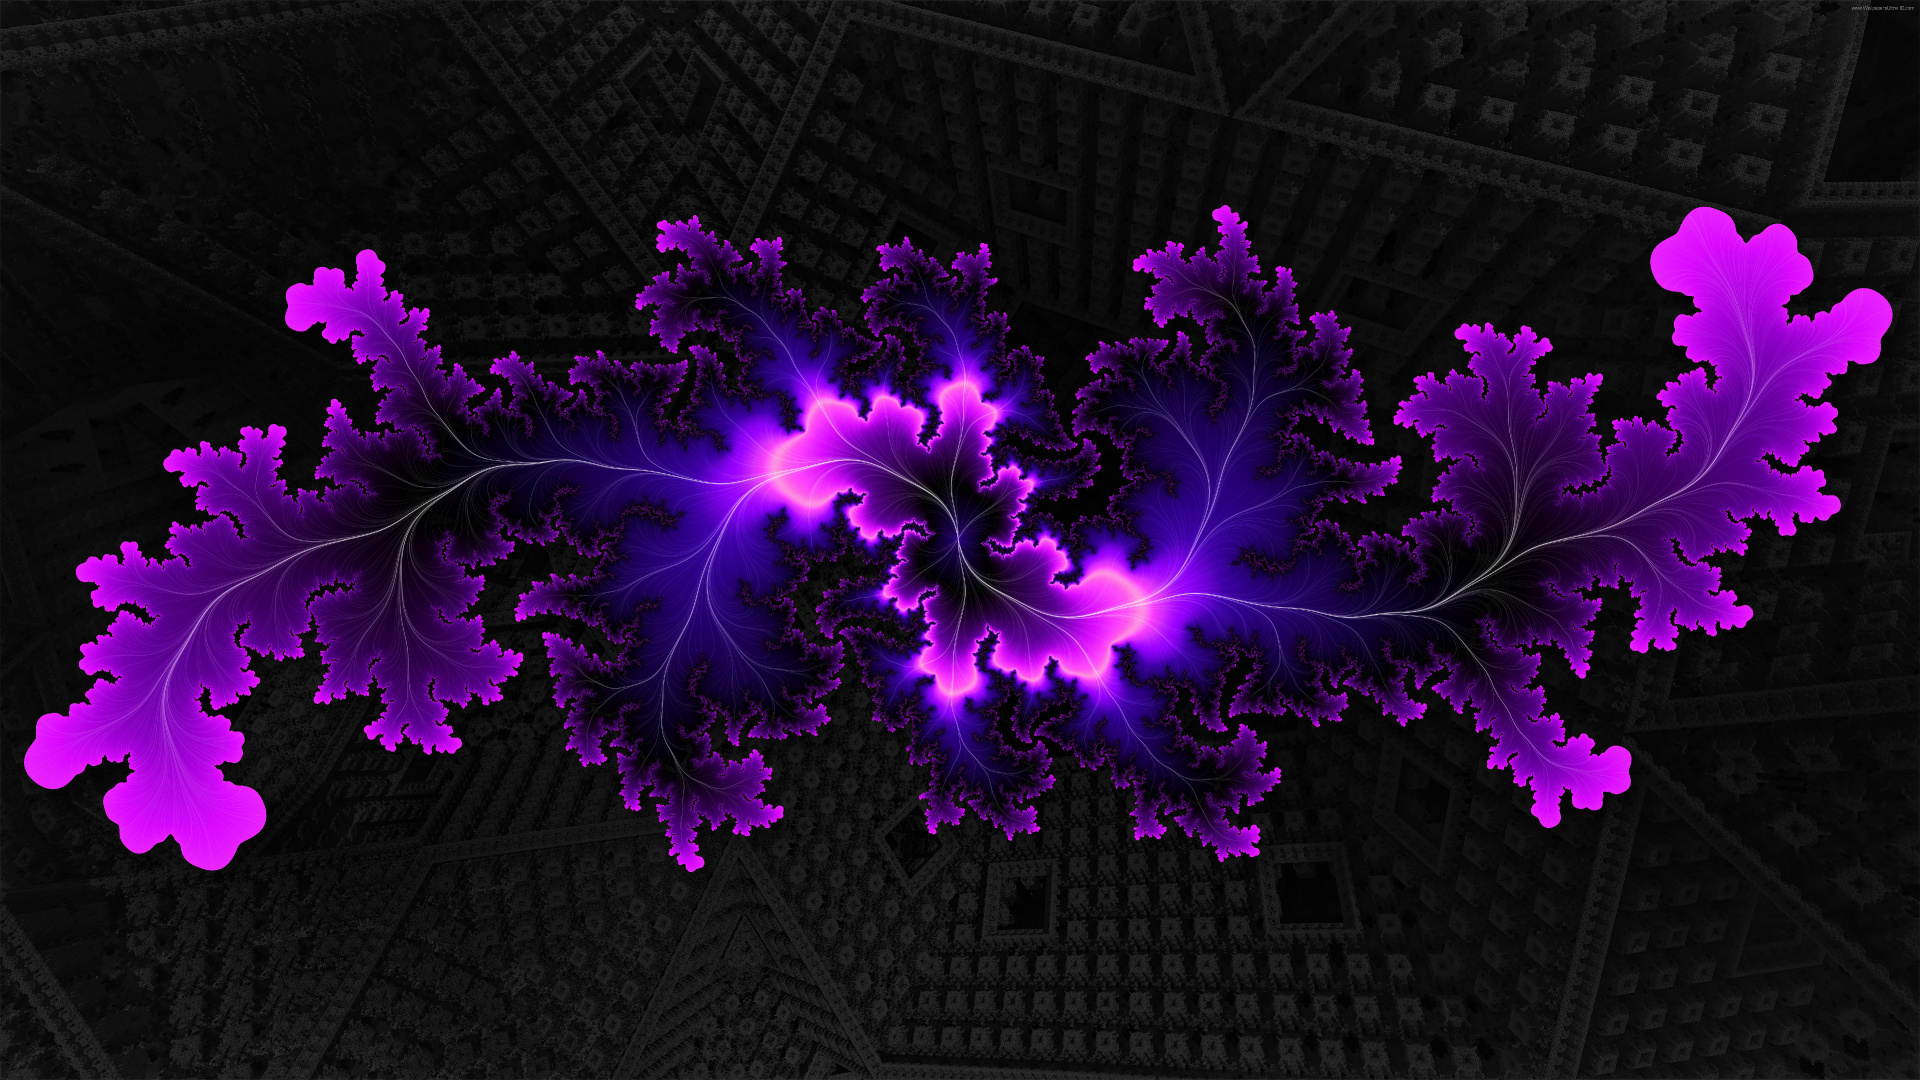 Purple Flower Petals on Black and White Textile. Wallpaper in 1920x1080 Resolution